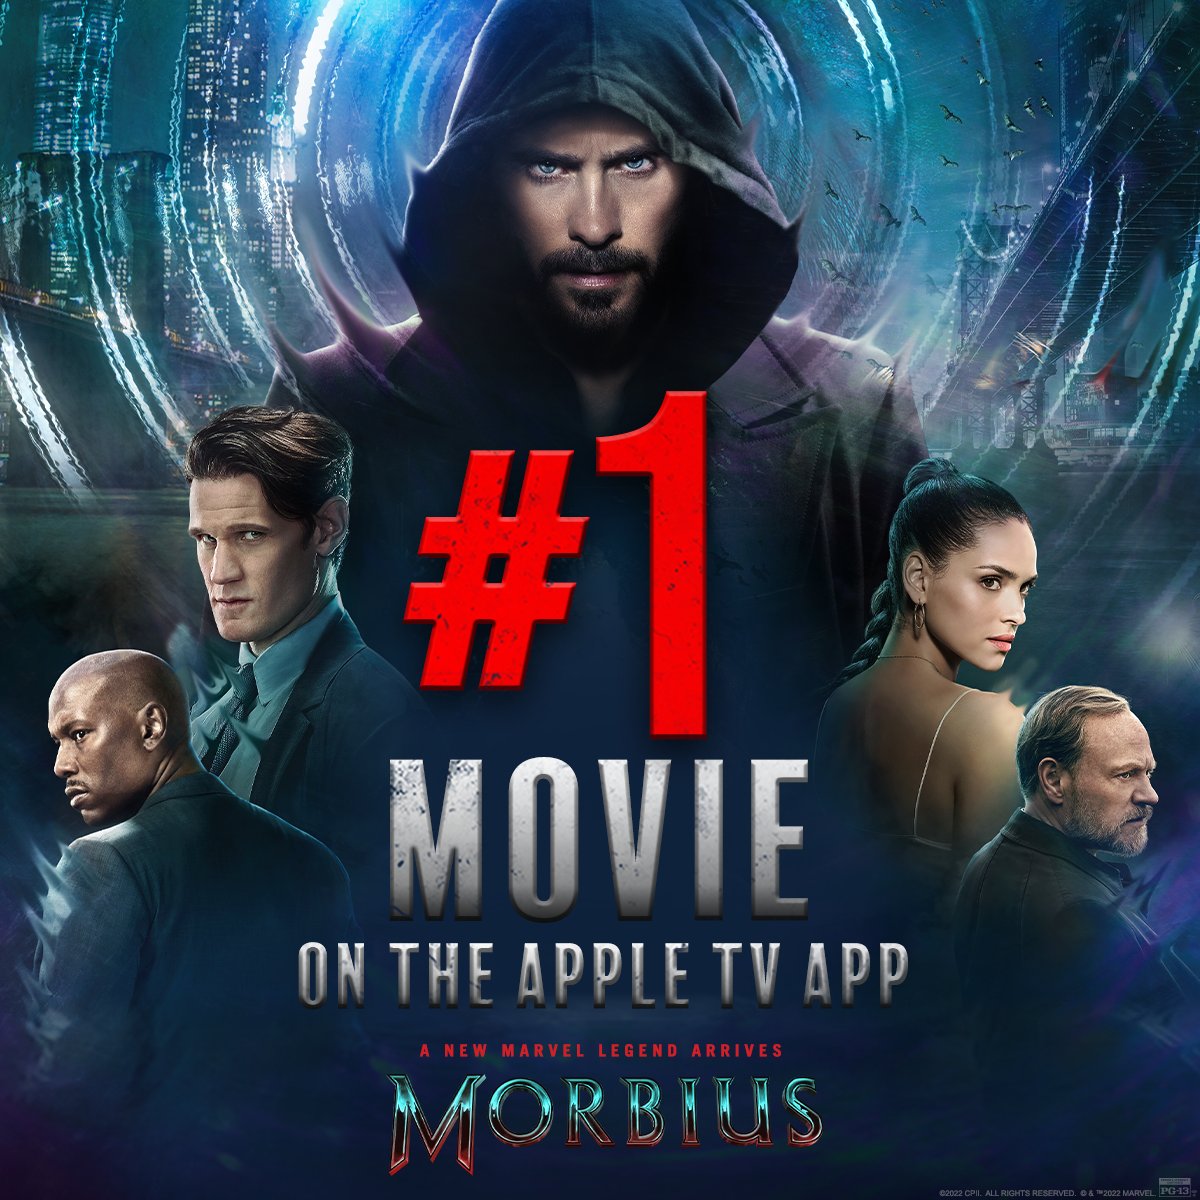 ansøge Arena revidere Morbius on X: "Thanks to everyone who's brought Dr. #Morbius home for a  house call! Get the #1 movie on the Apple TV app now!  https://t.co/ngzBbAbcYf https://t.co/THGgt4gWUK" / X